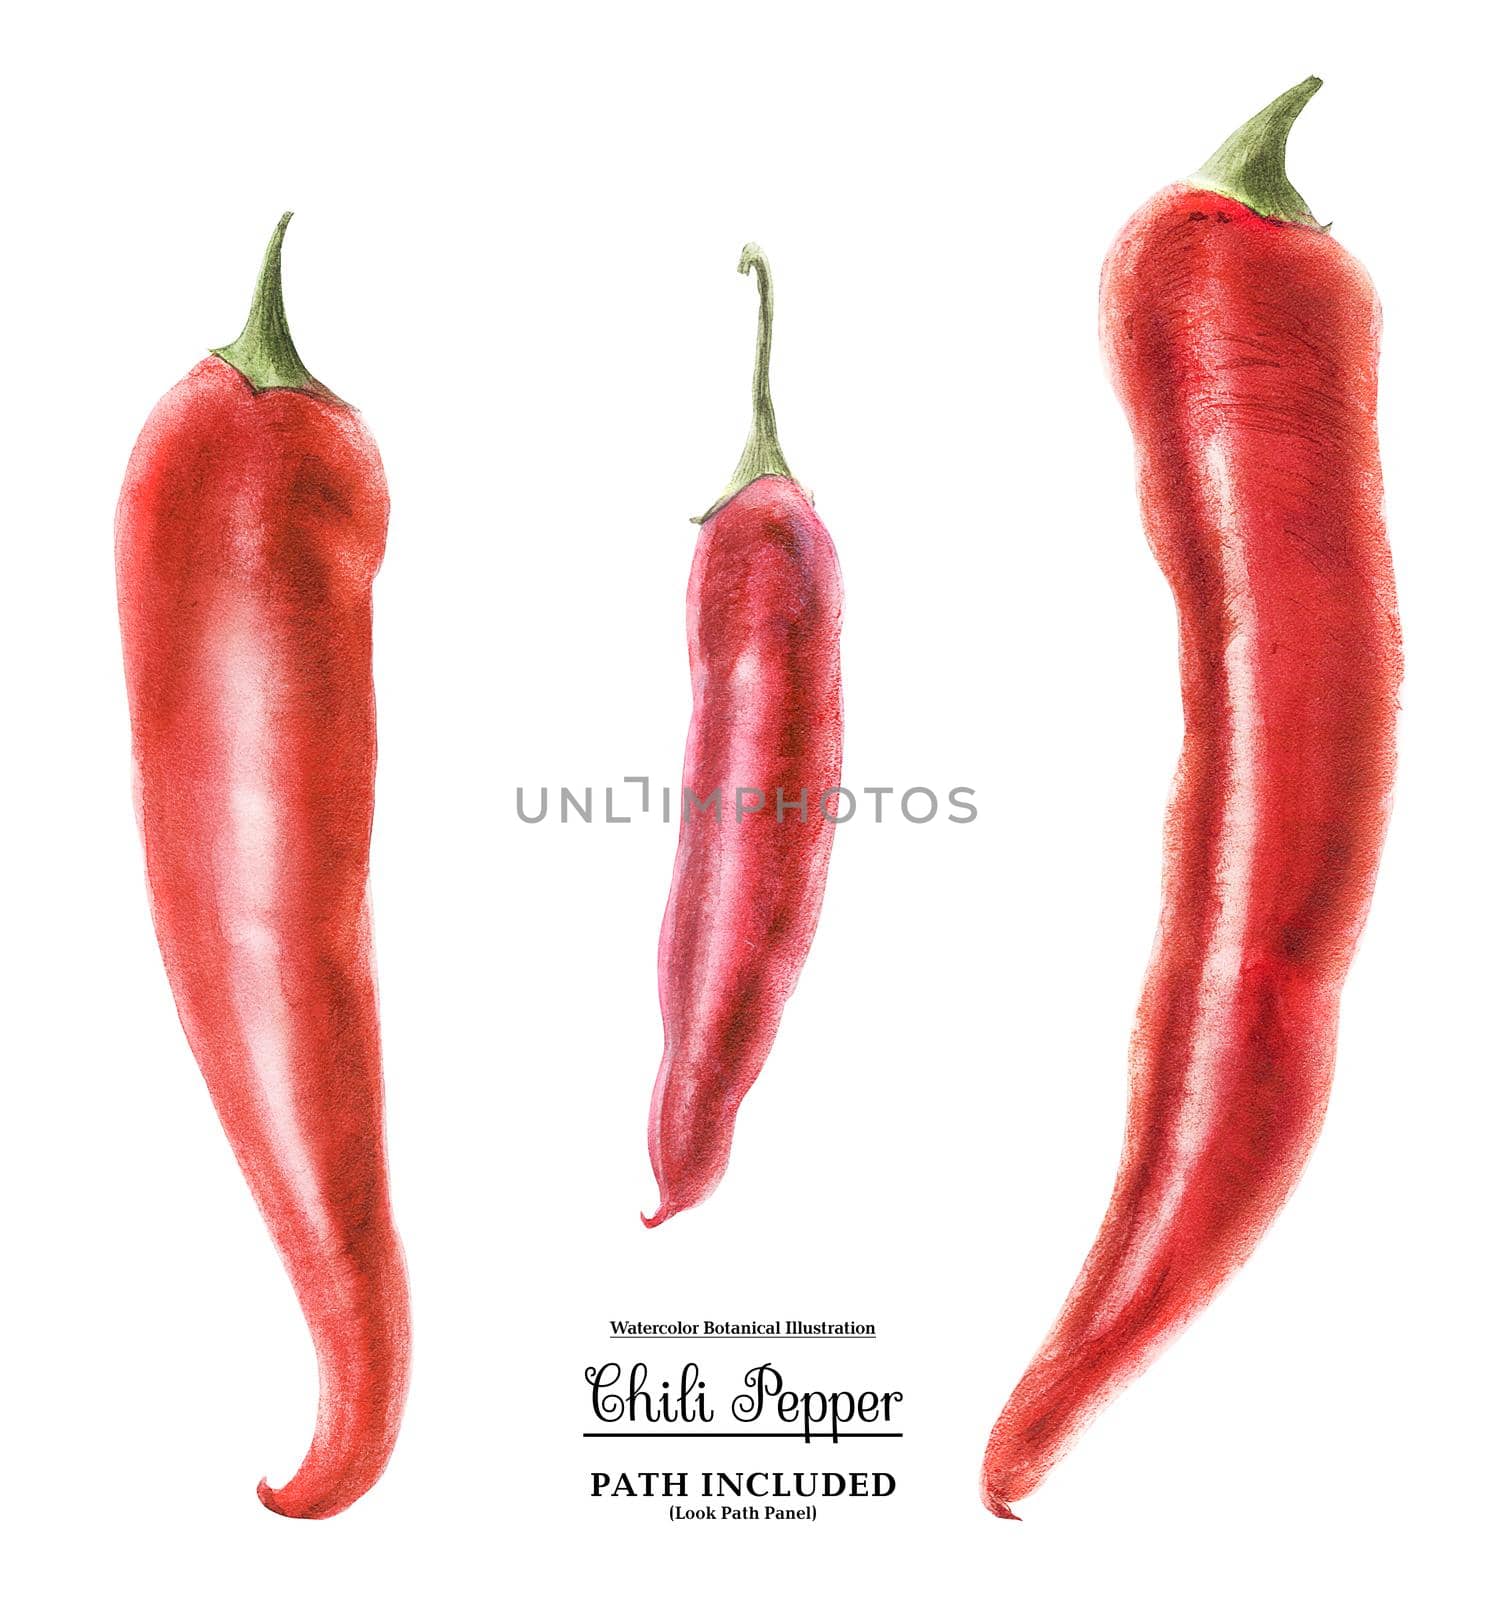 Modern watercolor botanical illustration of three red hot chili peppers. Isolated, path included